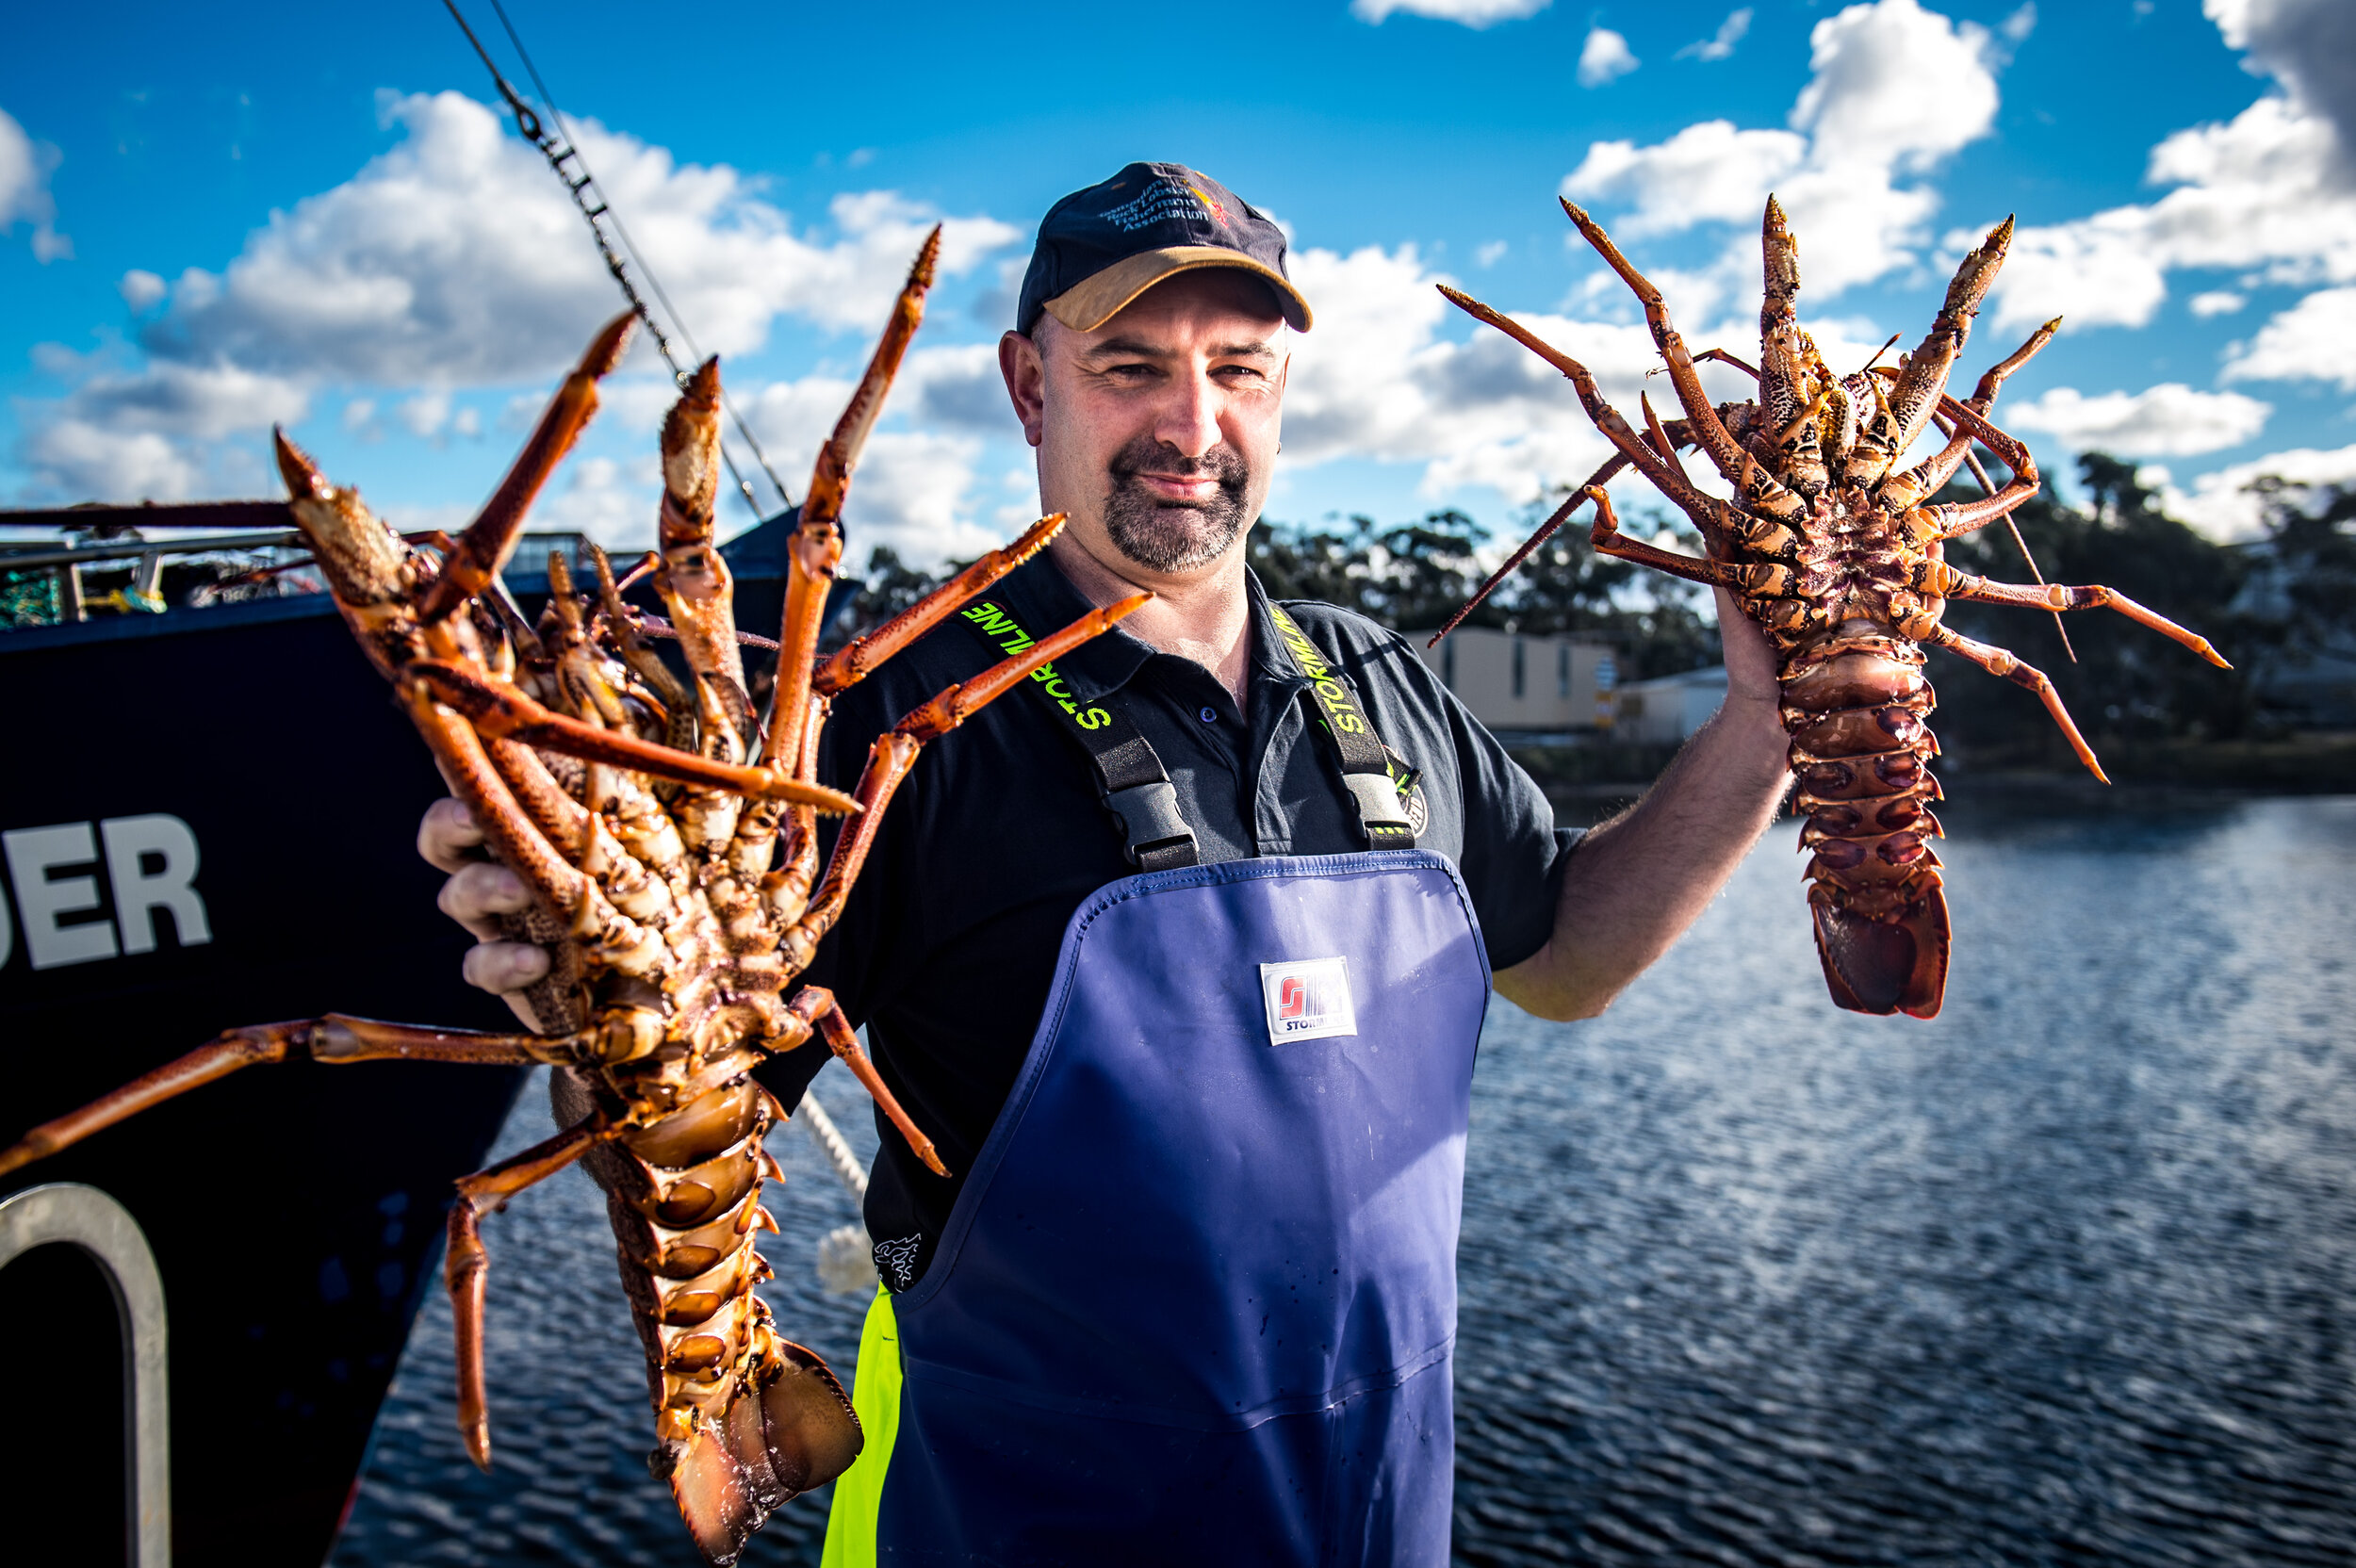 _BOLD CONTENDER_SQUIZZY_HOLDING LOBSTERS AT PORT_20190721_6038.jpg